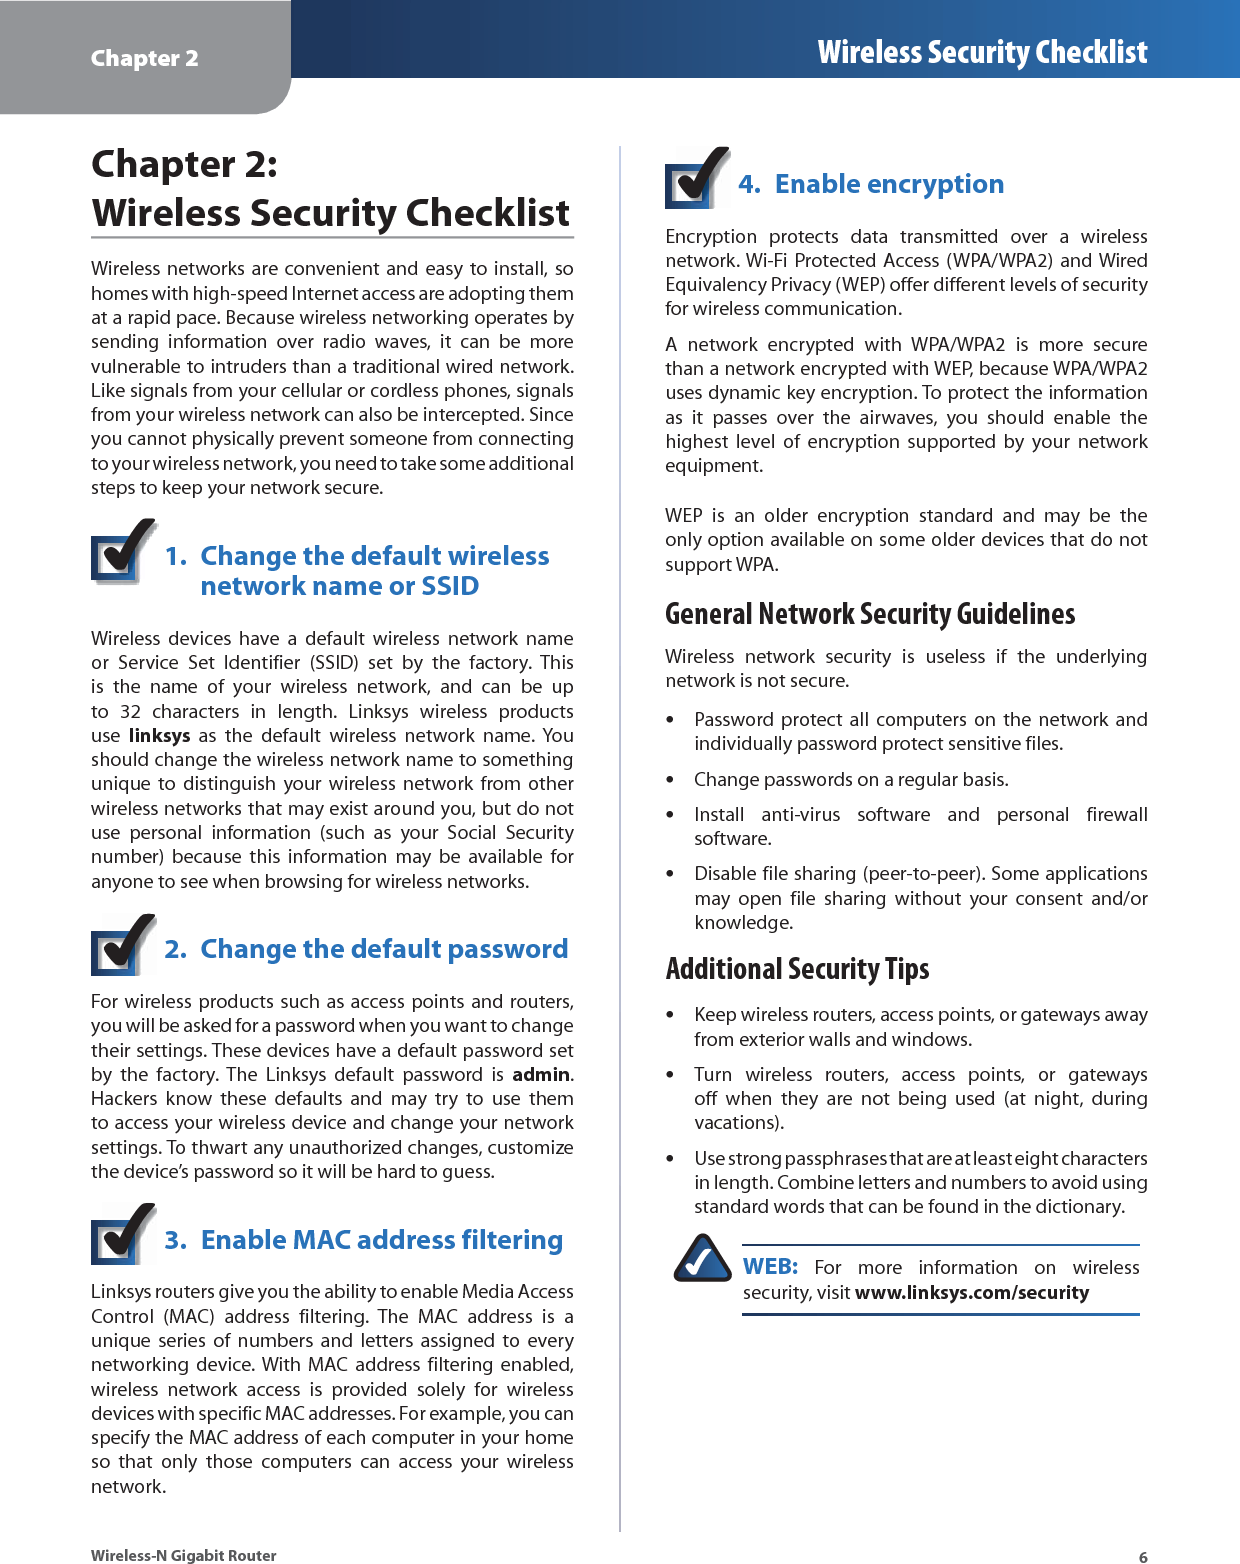 Chapter 2 Wireless Security Checklist6Wireless-N Gigabit RouterChapter 2: Wireless Security ChecklistWireless networks are convenient and easy to install, so homes with high-speed Internet access are adopting them at a rapid pace. Because wireless networking operates by sending information over radio waves, it can be more vulnerable to intruders than a traditional wired network. Like signals from your cellular or cordless phones, signals from your wireless network can also be intercepted. Since you cannot physically prevent someone from connecting to your wireless network, you need to take some additional steps to keep your network secure. 1.  Change the default wireless  network name or SSIDWireless devices have a default wireless network name or Service Set Identifier (SSID) set by the factory. This is the name of your wireless network, and can be up to 32 characters in length. Linksys wireless products use  linksys as the default wireless network name. You should change the wireless network name to something unique to distinguish your wireless network from other wireless networks that may exist around you, but do not use personal information (such as your Social Security number) because this information may be available for anyone to see when browsing for wireless networks. 2.  Change the default passwordFor wireless products such as access points and routers, you will be asked for a password when you want to change their settings. These devices have a default password set by the factory. The Linksys default password is admin. Hackers know these defaults and may try to use them to access your wireless device and change your network settings. To thwart any unauthorized changes, customize the device’s password so it will be hard to guess.3.  Enable MAC address filteringLinksys routers give you the ability to enable Media Access Control (MAC) address filtering. The MAC address is a unique series of numbers and letters assigned to every networking device. With MAC address filtering enabled, wireless network access is provided solely for wireless devices with specific MAC addresses. For example, you can specify the MAC address of each computer in your home so that only those computers can access your wireless network. 4.  Enable encryptionEncryption protects data transmitted over a wireless network. Wi-Fi Protected Access (WPA/WPA2) and Wired Equivalency Privacy (WEP) offer different levels of security for wireless communication.A network encrypted with WPA/WPA2 is more secure than a network encrypted with WEP, because WPA/WPA2 uses dynamic key encryption. To protect the information as it passes over the airwaves, you should enable the highest level of encryption supported by your network equipment. WEP is an older encryption standard and may be the only option available on some older devices that do not support WPA.General Network Security GuidelinesWireless network security is useless if the underlying network is not secure. Password protect all computers on the network and sindividually password protect sensitive files.Change passwords on a regular basis.sInstall anti-virus software and personal firewall ssoftware.Disable file sharing (peer-to-peer). Some applications smay open file sharing without your consent and/or knowledge.Additional Security TipsKeep wireless routers, access points, or gateways away sfrom exterior walls and windows.Turn wireless routers, access points, or gateways soff when they are not being used (at night, during vacations).Use strong passphrases that are at least eight characters sin length. Combine letters and numbers to avoid using standard words that can be found in the dictionary. WEB: For more information on wireless security, visit www.linksys.com/security